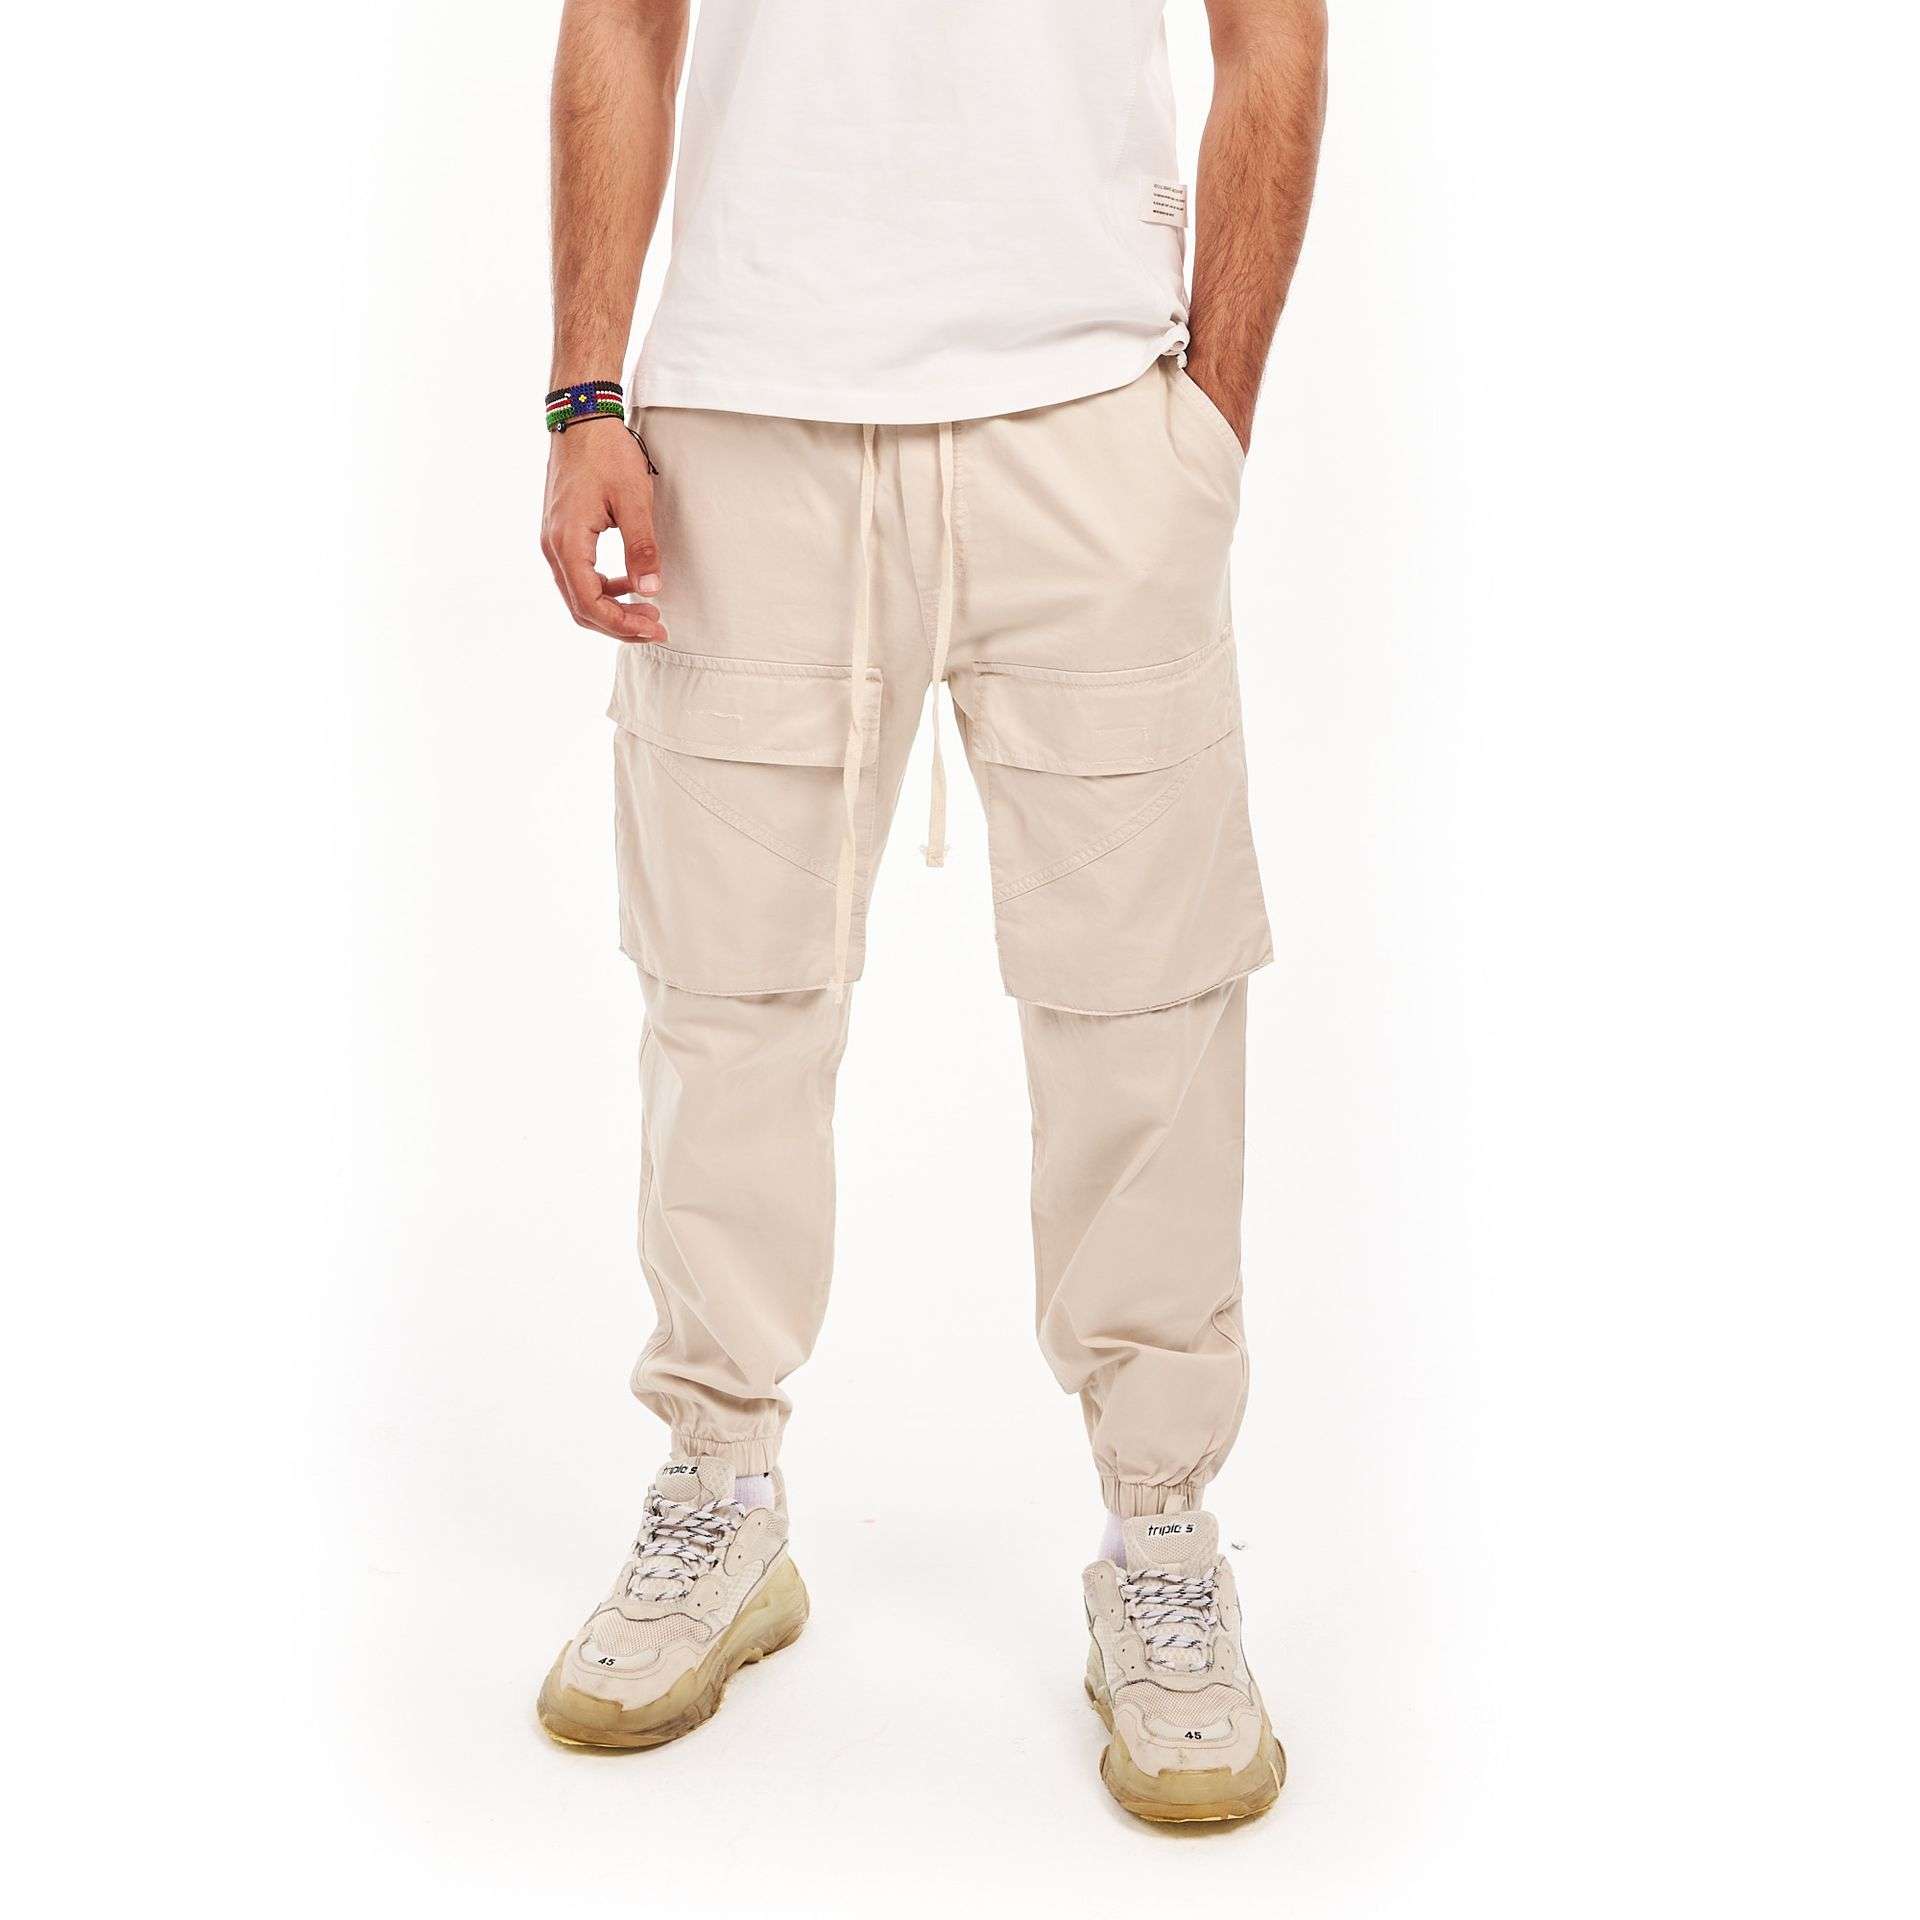 Baggy beige pant - Bam Clothing